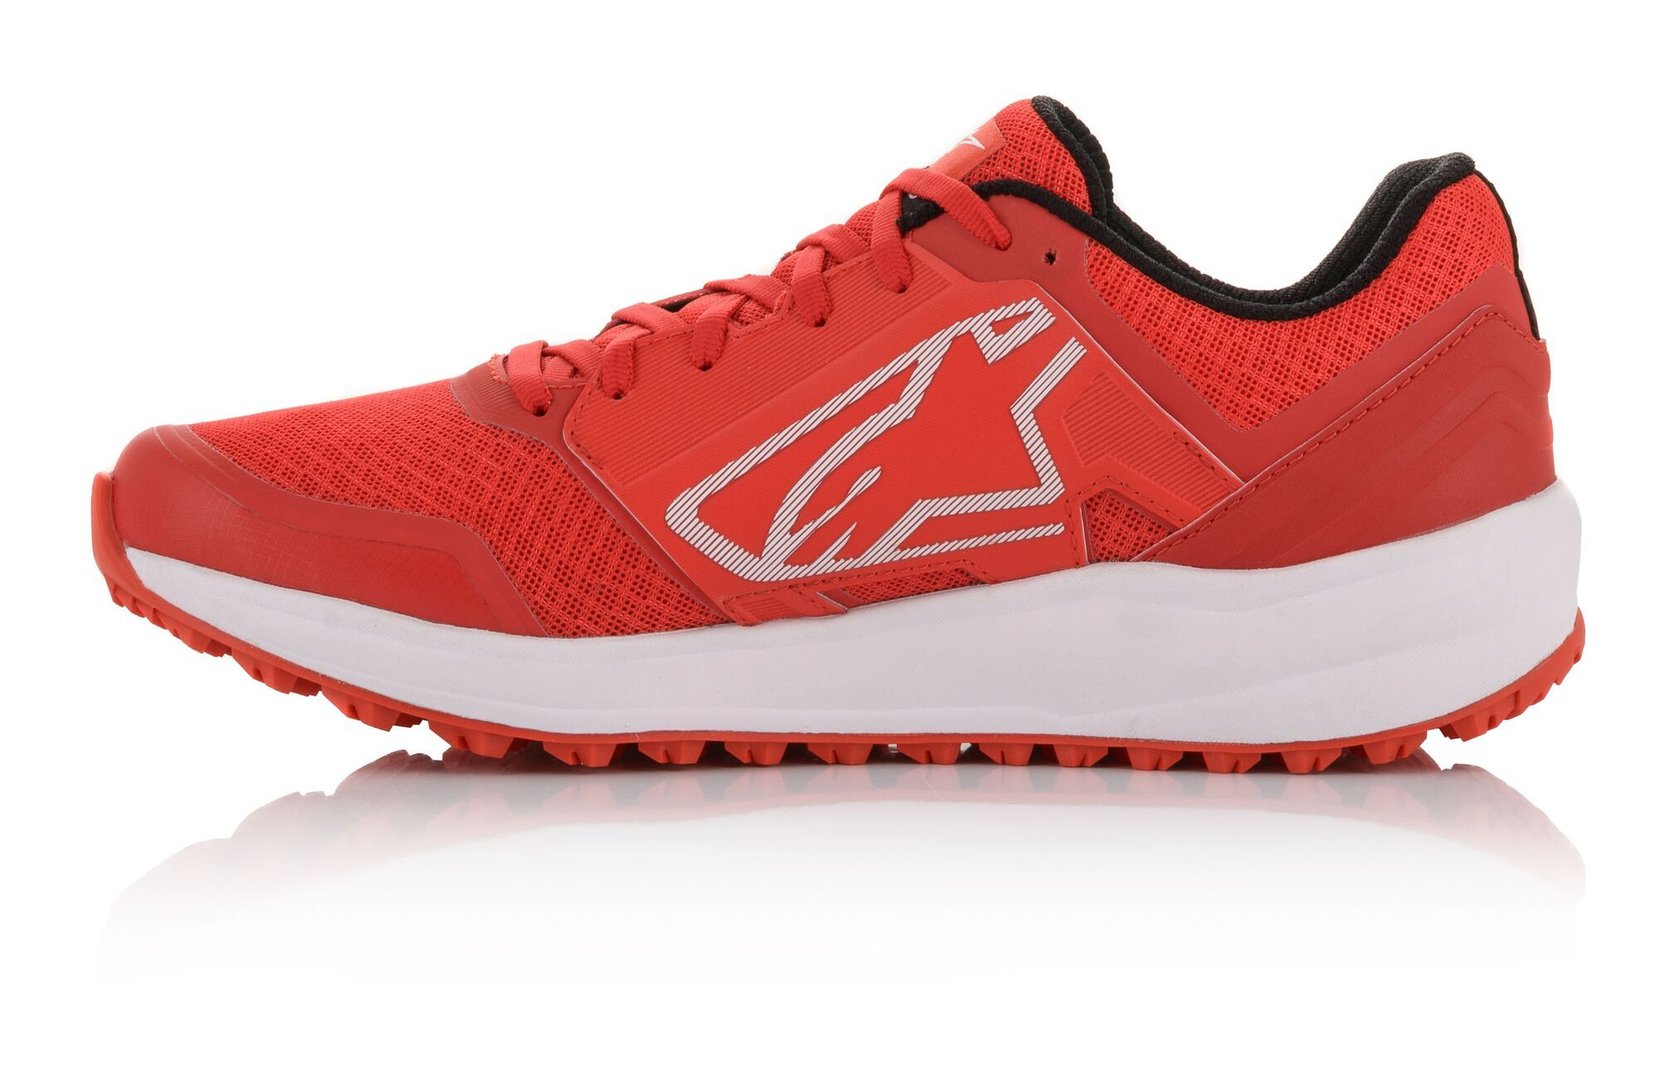 ALPINESTARS 2654820_32_6 META TRAIL RUNNING shoes, red/white, size 38 (6) (Фото-3)